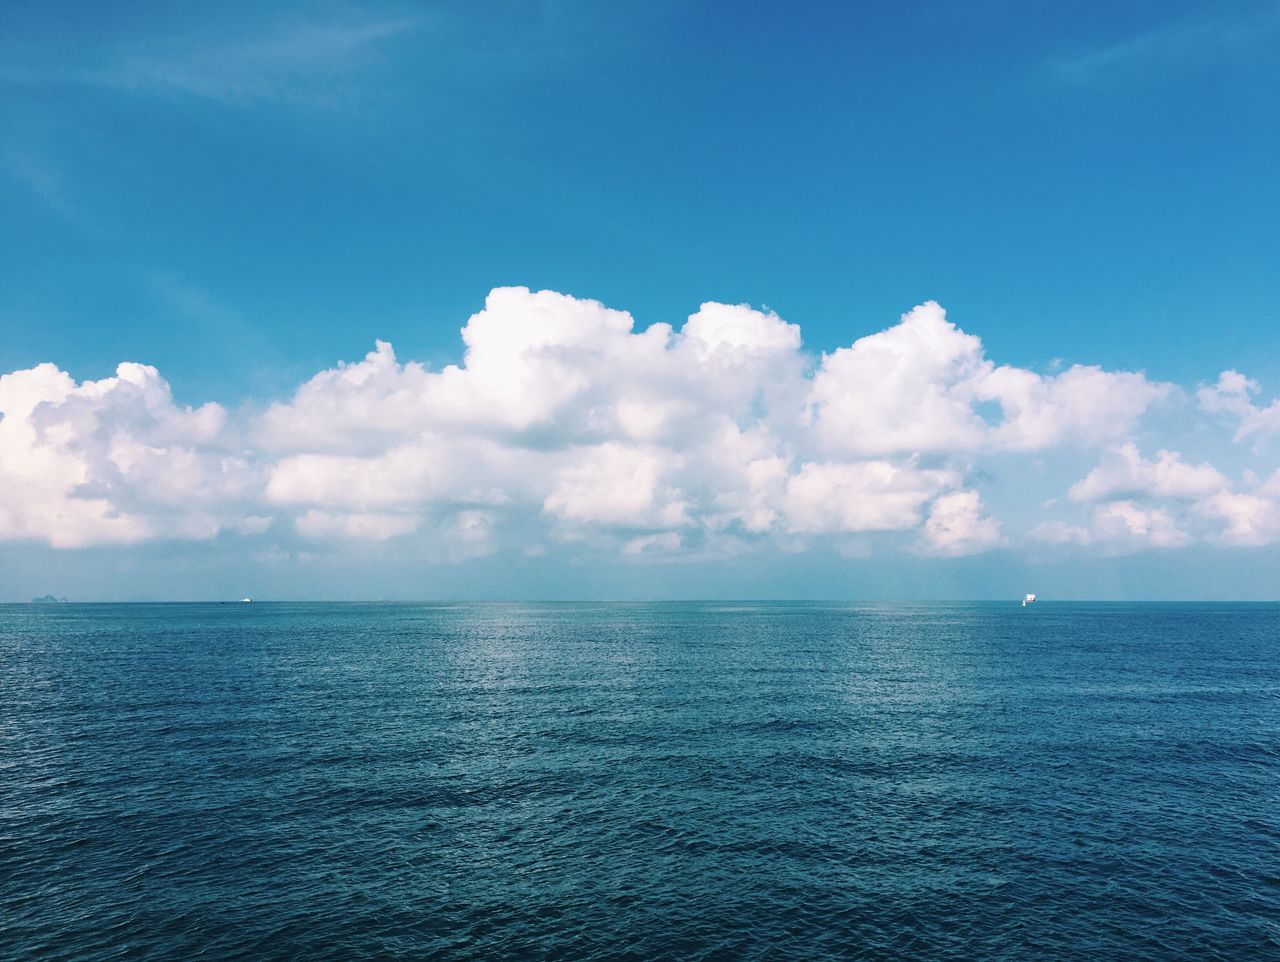 sea, water, waterfront, tranquil scene, horizon over water, scenics, tranquility, sky, blue, beauty in nature, nature, rippled, idyllic, cloud, seascape, cloud - sky, no people, outdoors, calm, day